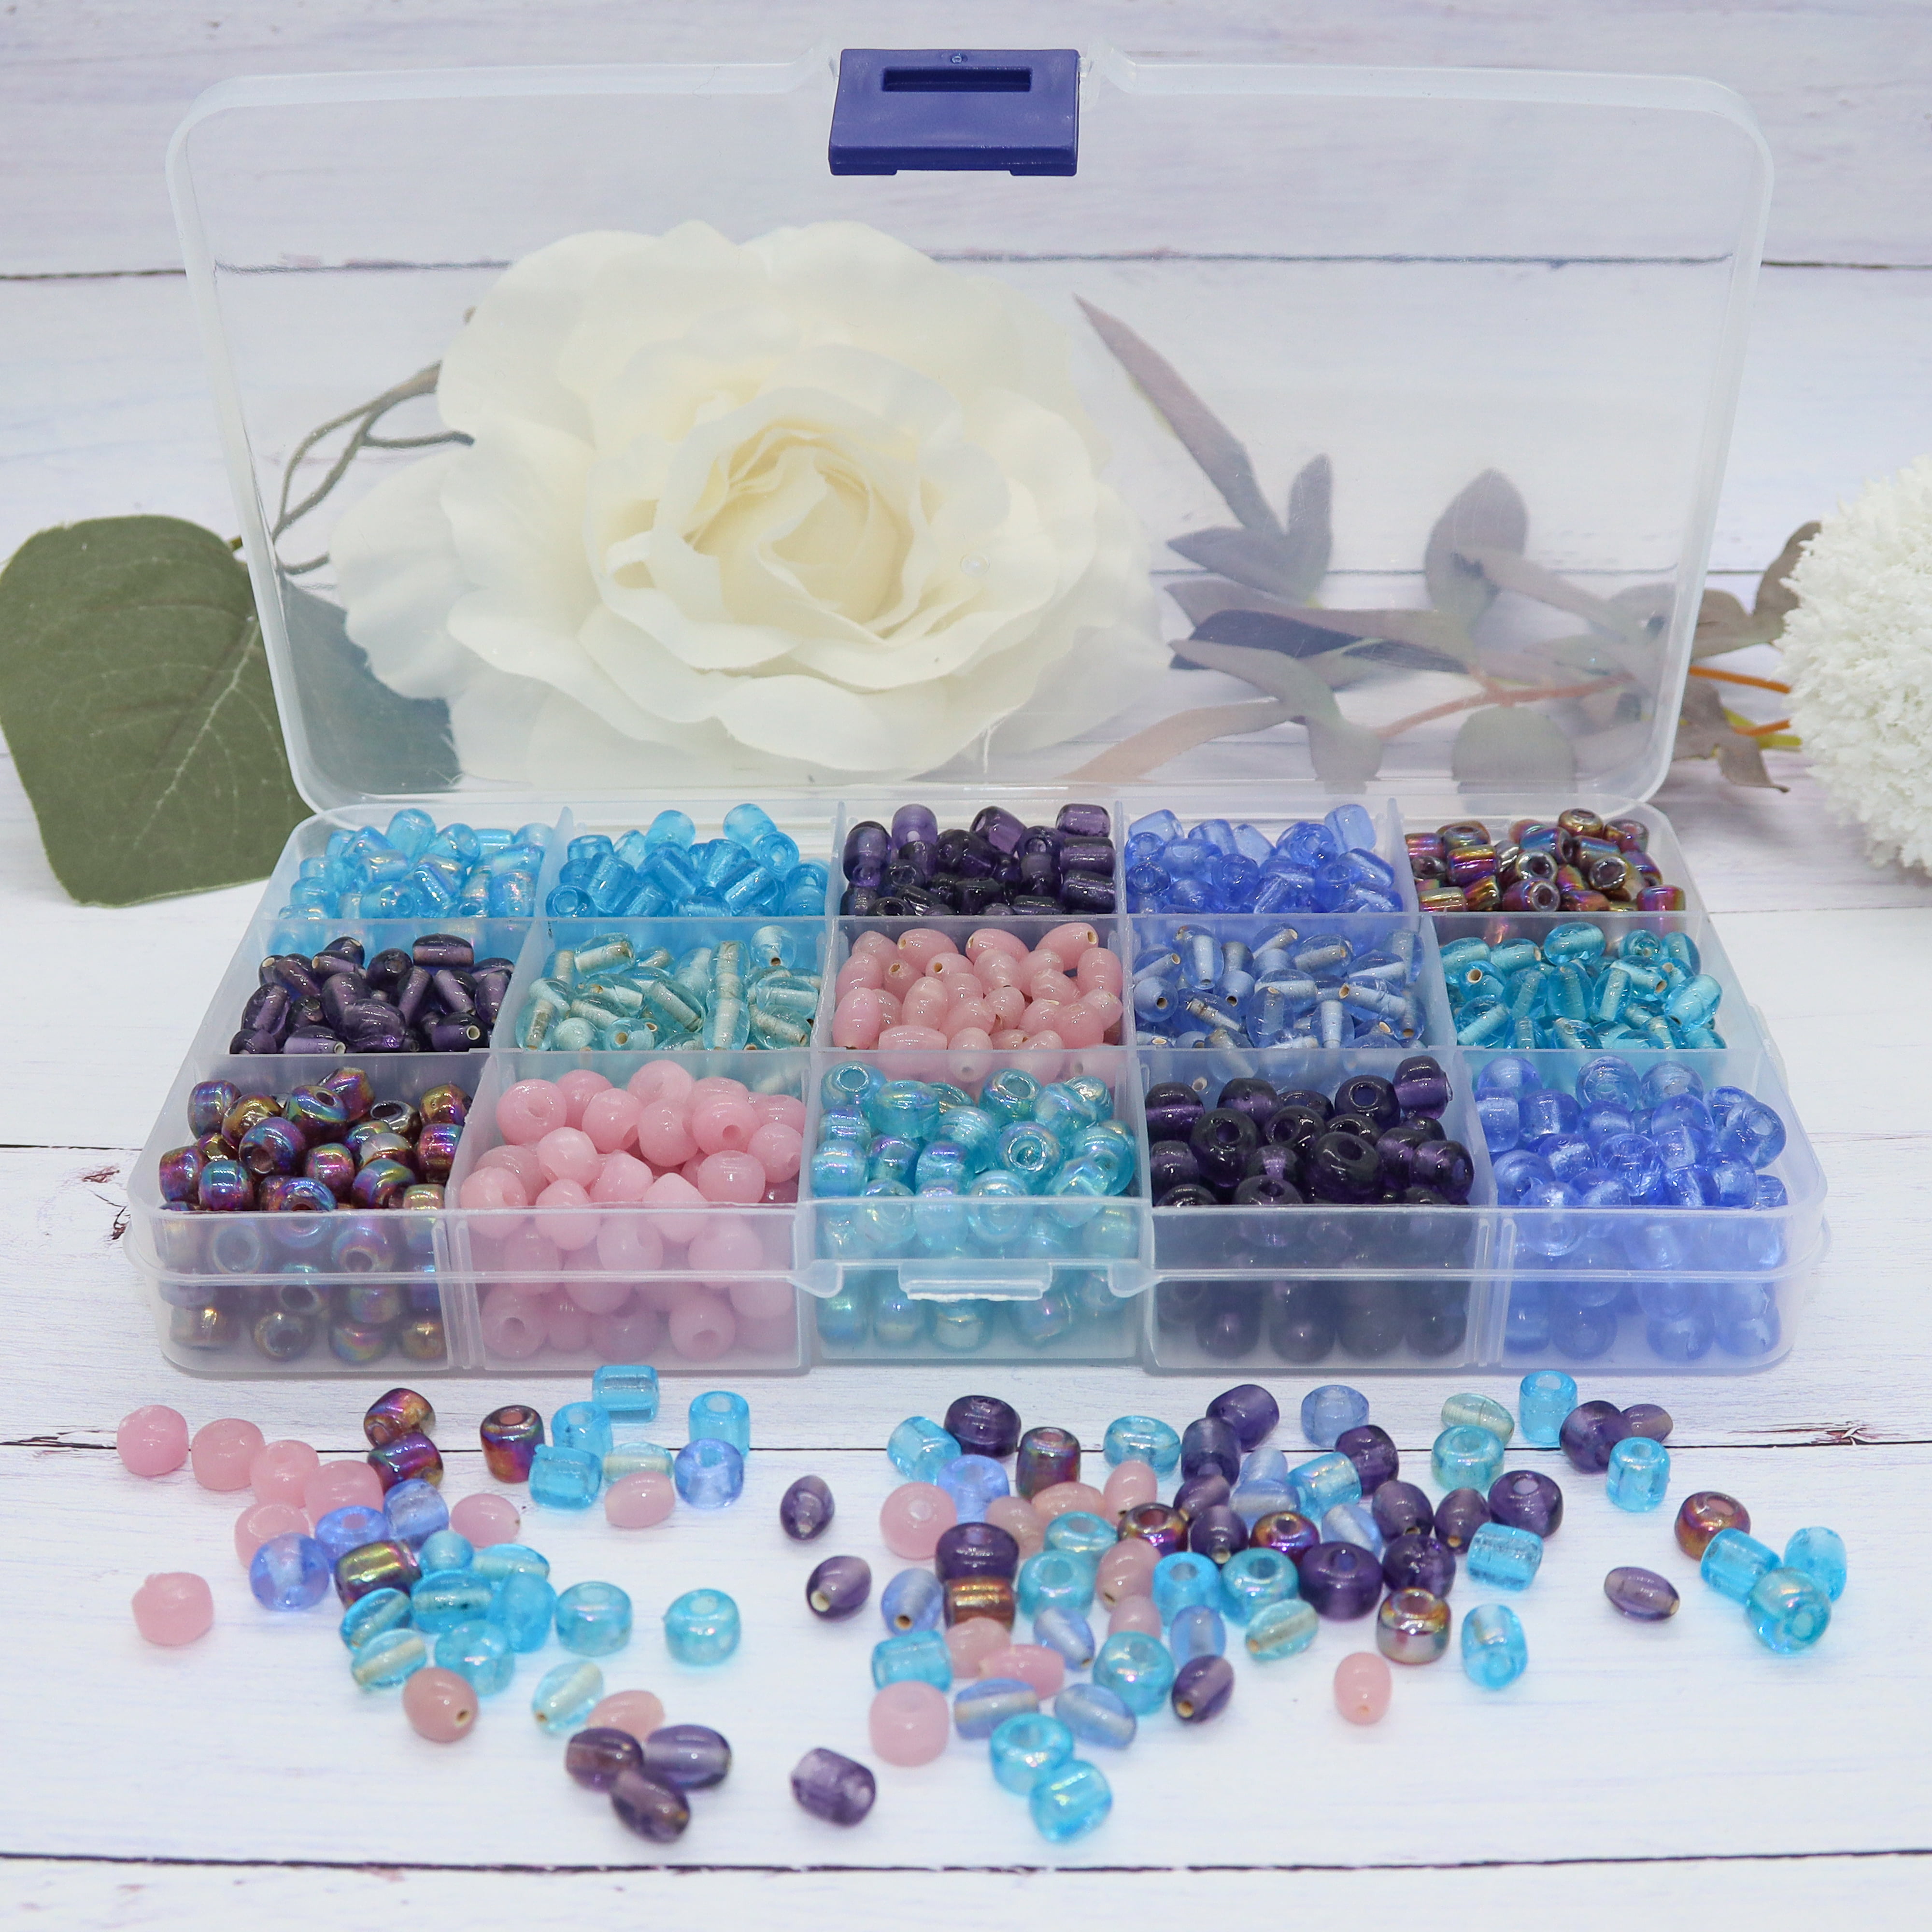 300+ PONY BEAD COLORS & MIXES [DIY Jewelry Supply] crafts beads